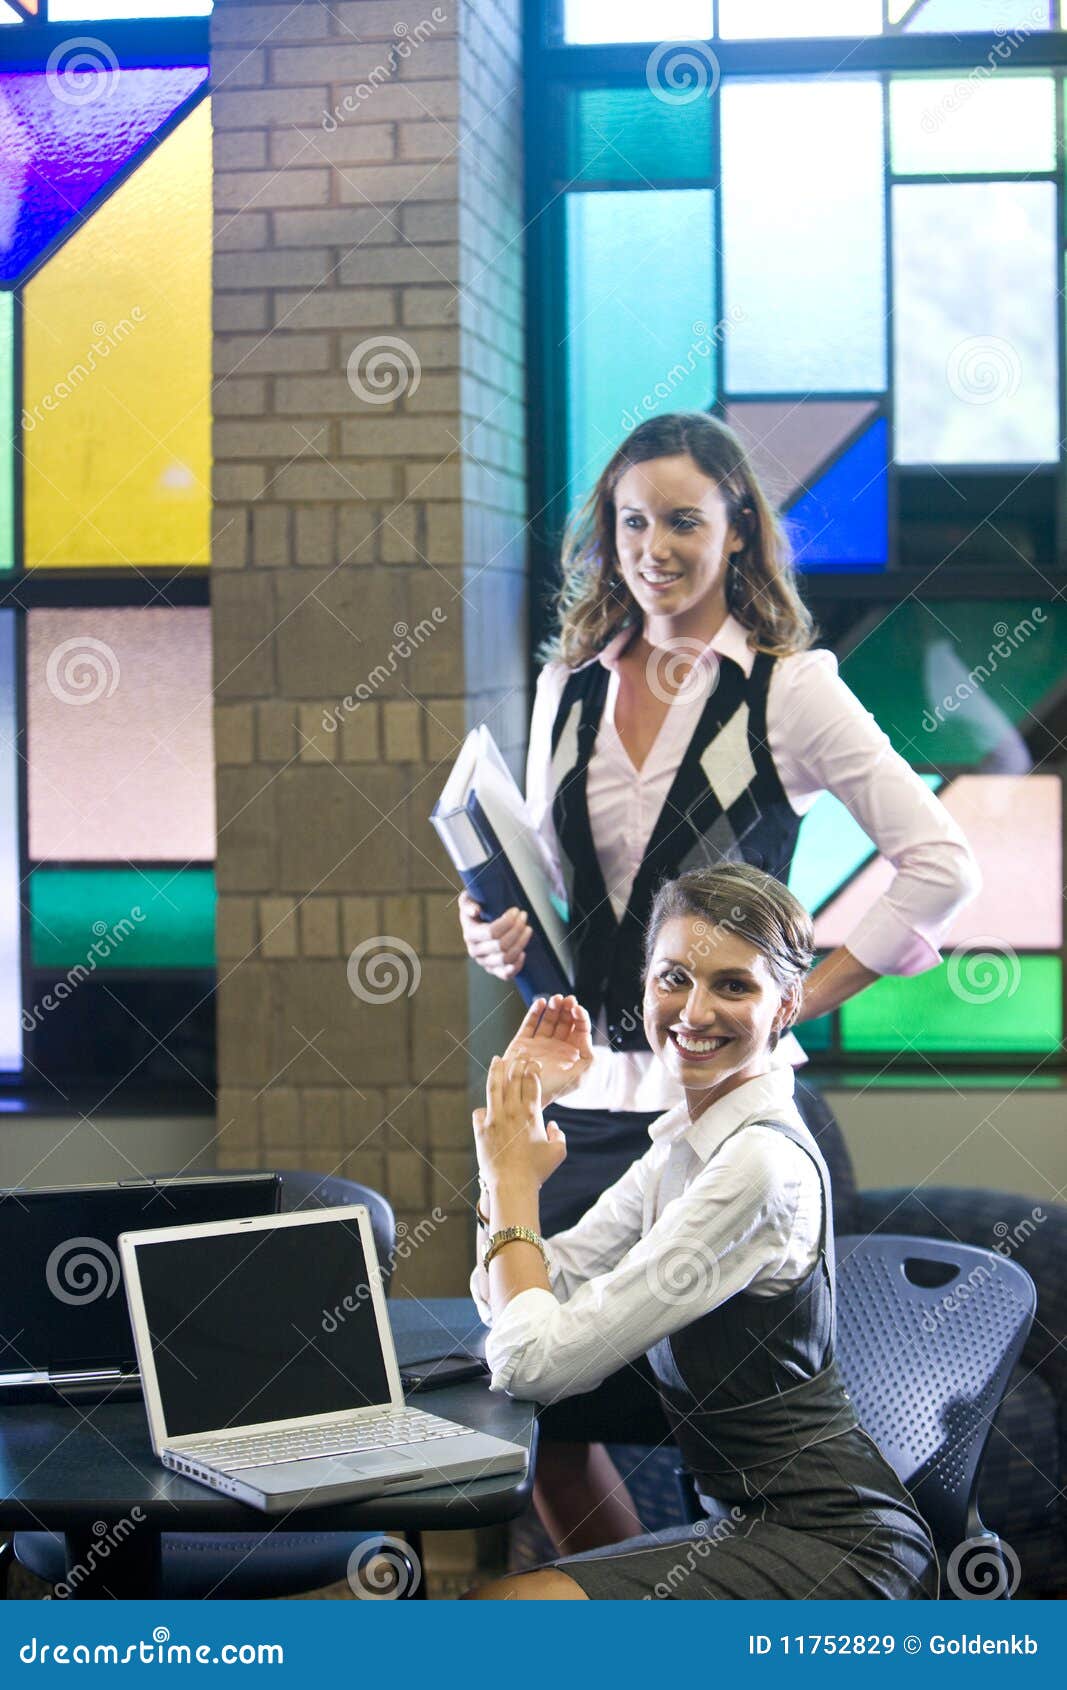 Two Young Women Meeting With Laptops At Table Royalty Free Stock Images - Image: 11752829